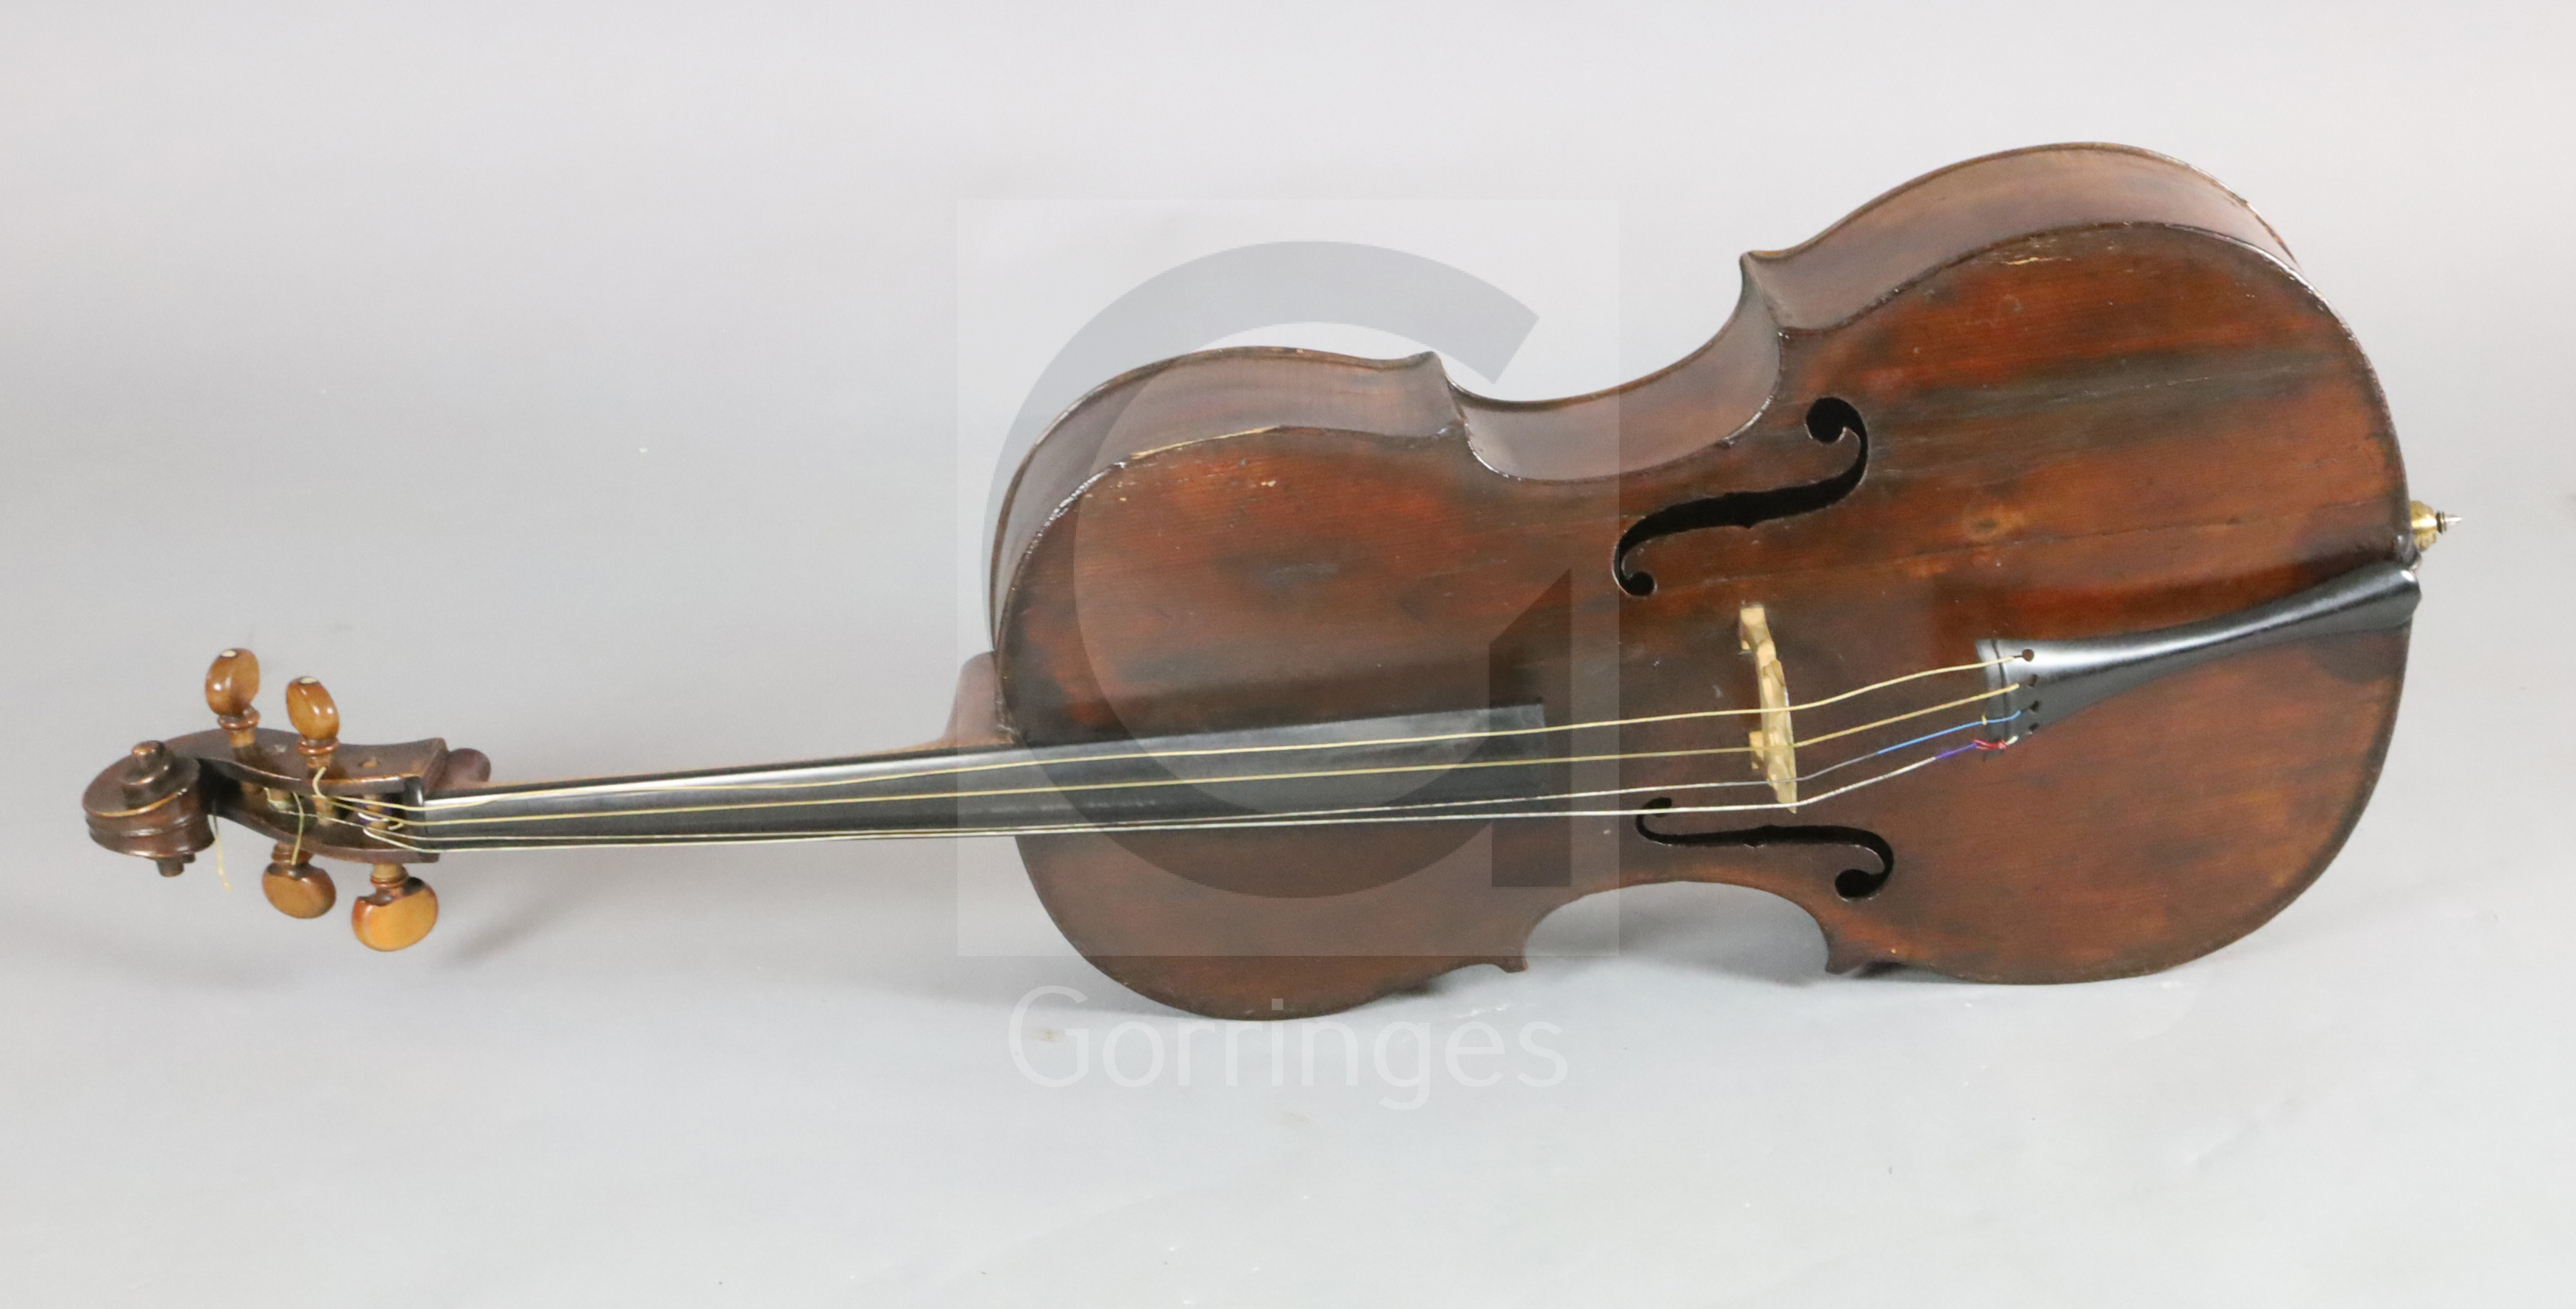 An 18th century cello, labelled 'Jacobus Stainer in absam prope oe nipontum 1660', in a W. E. Hill & - Image 2 of 2